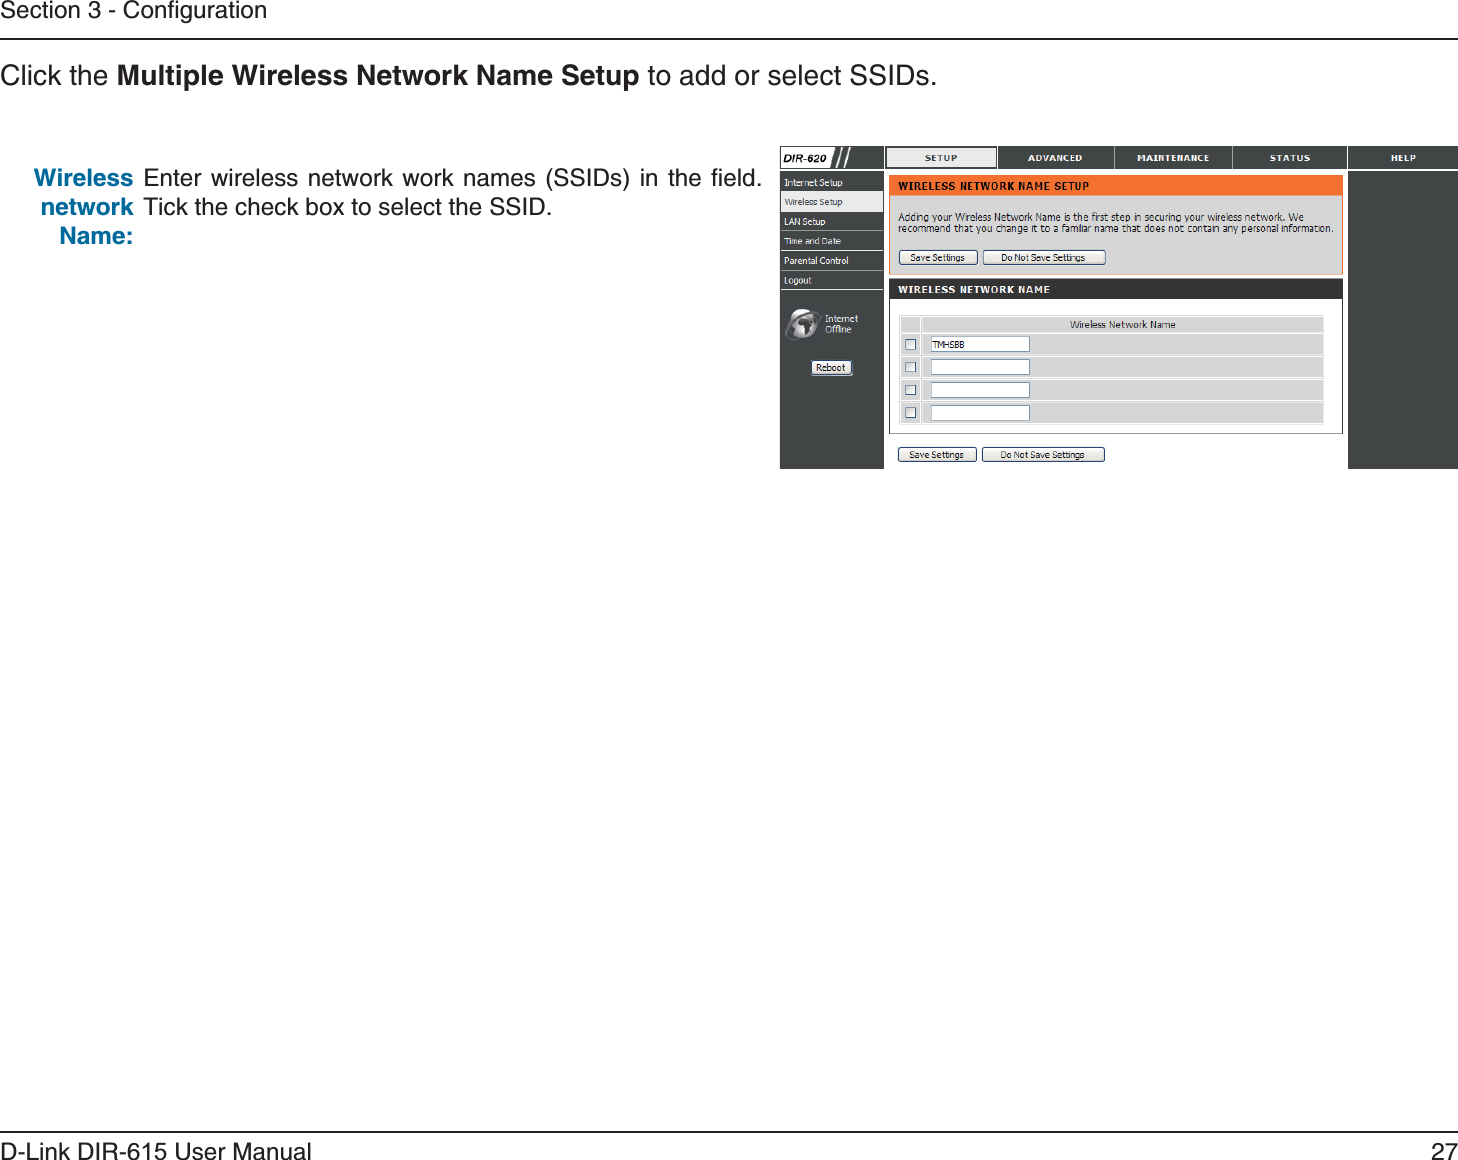 27D-Link DIR-6 User ManualSection 3 - ConfigurationEnter wireless network work names (SSIDs) in the field. Tick the check box to select the SSID.Click the  to add or select SSIDs.